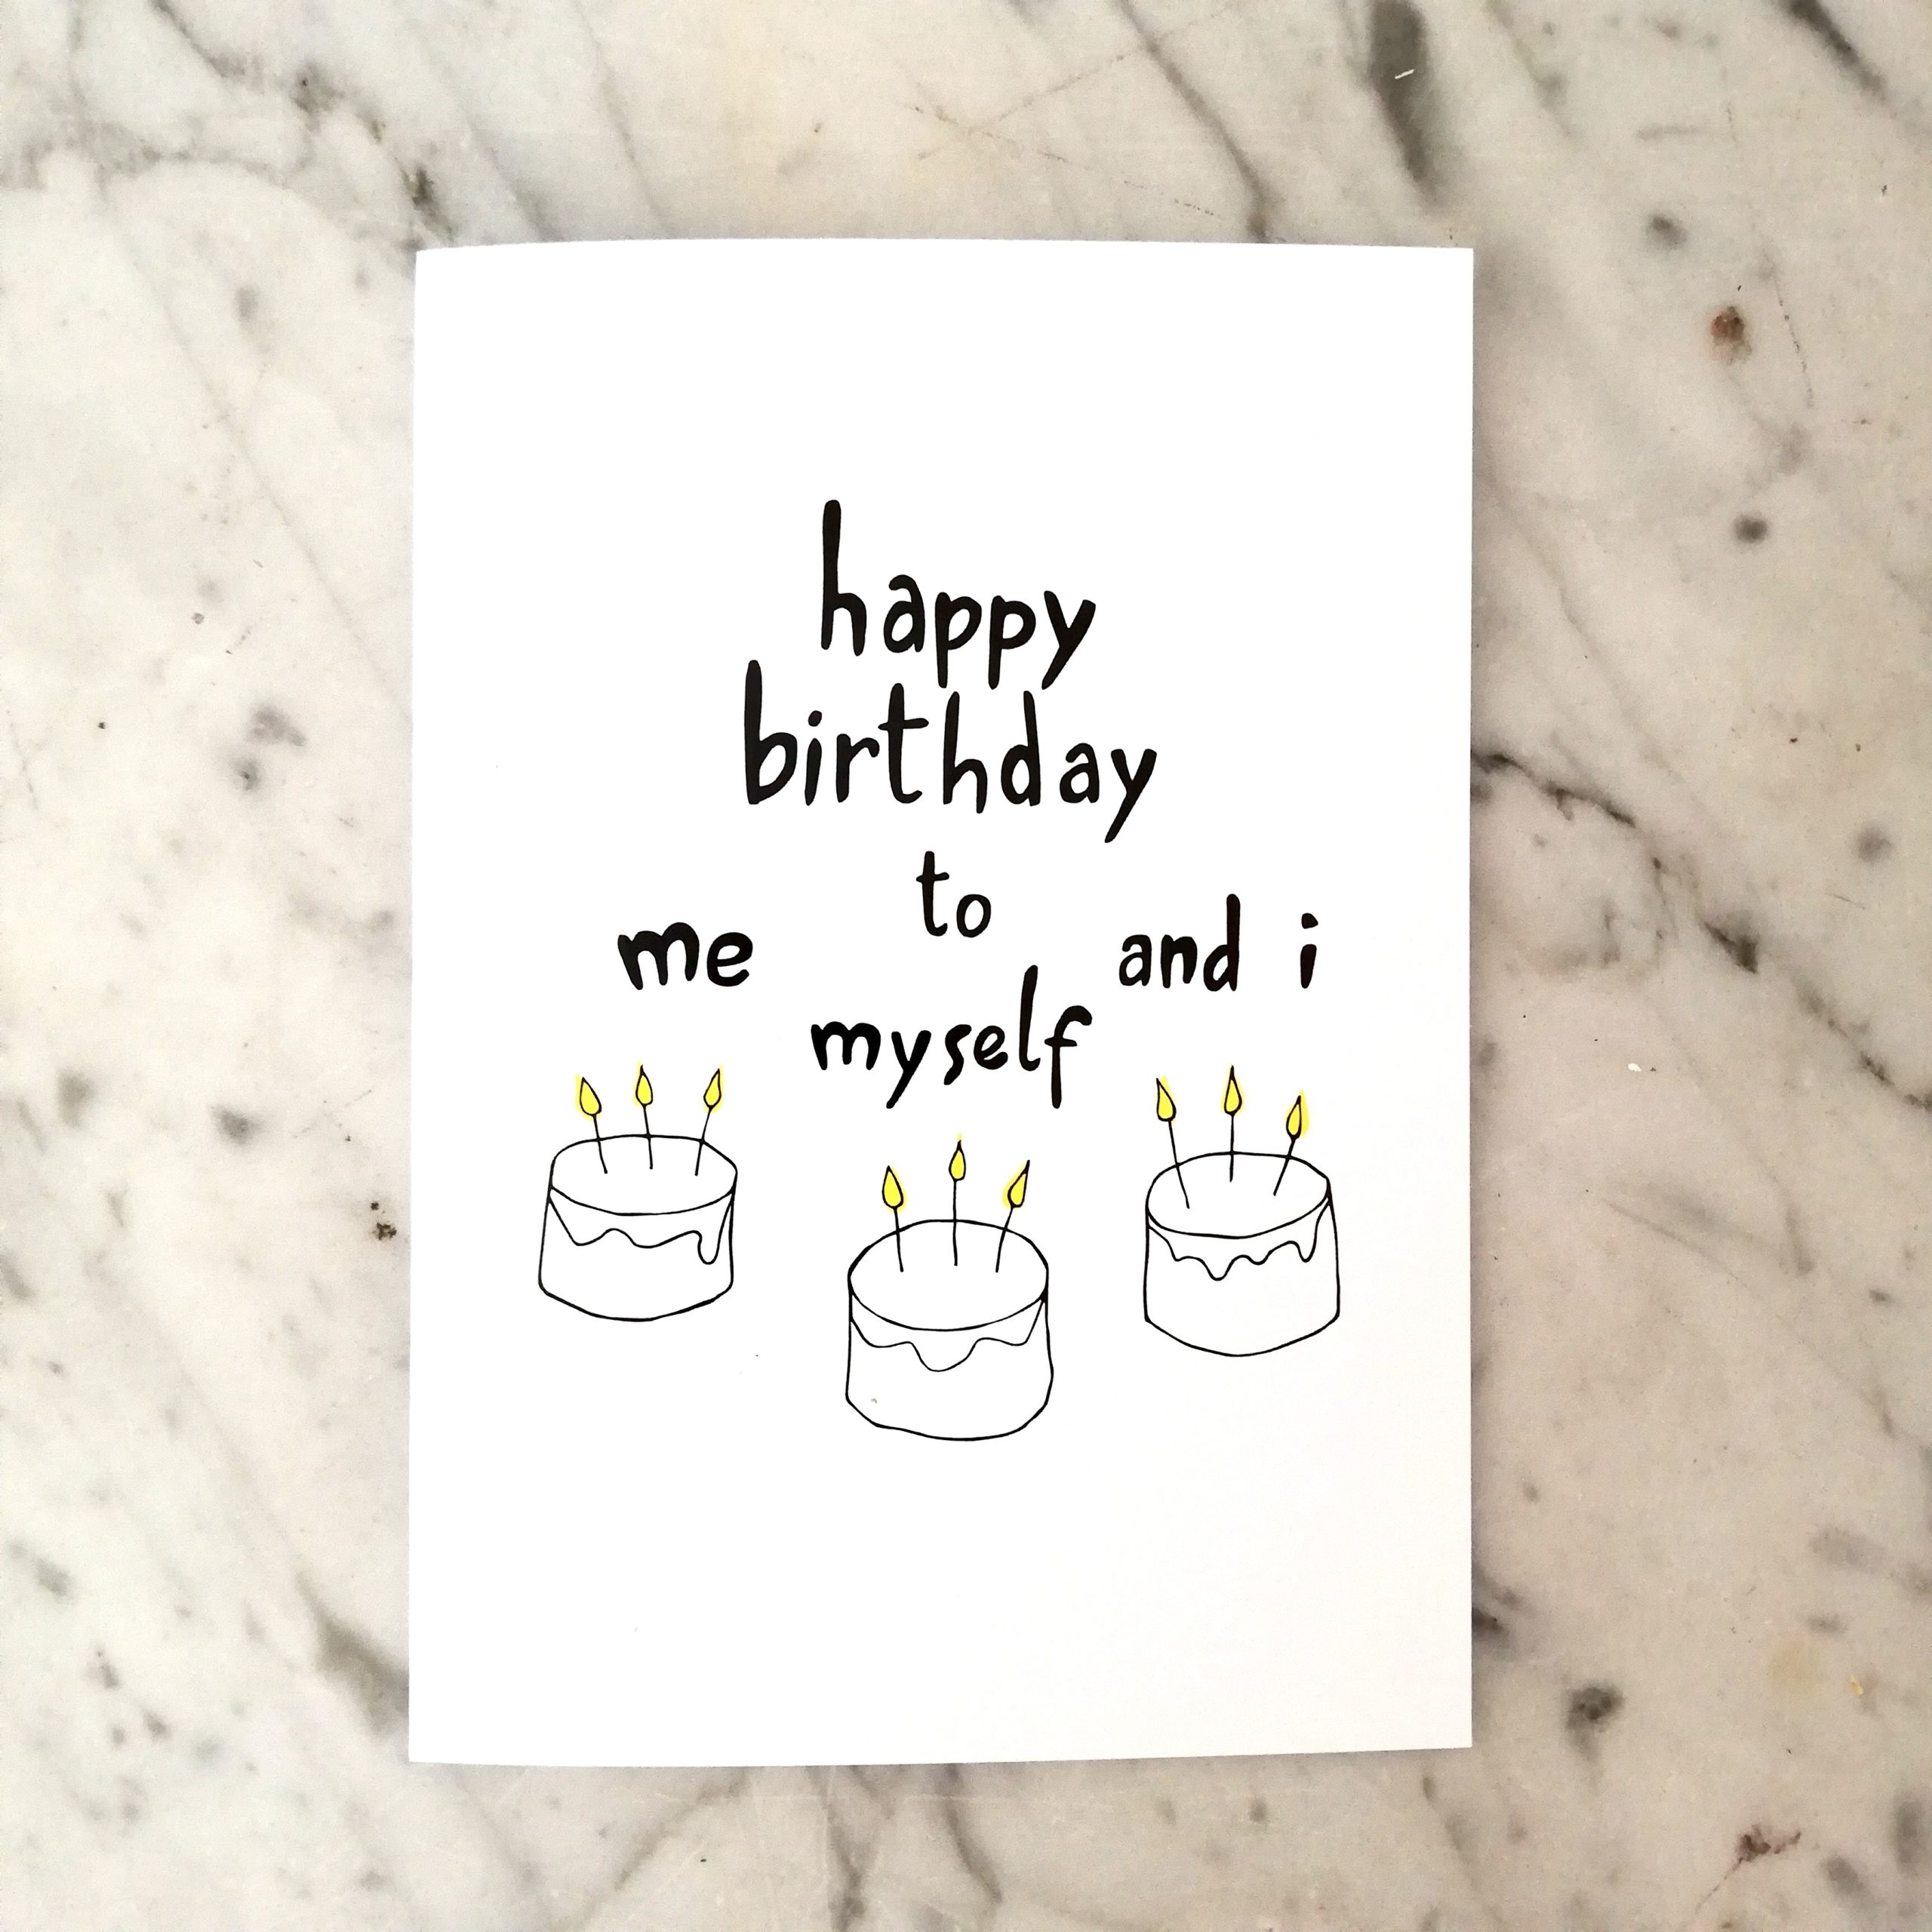 Carte d'anniversaire - Happy Birthday to me, myself and I